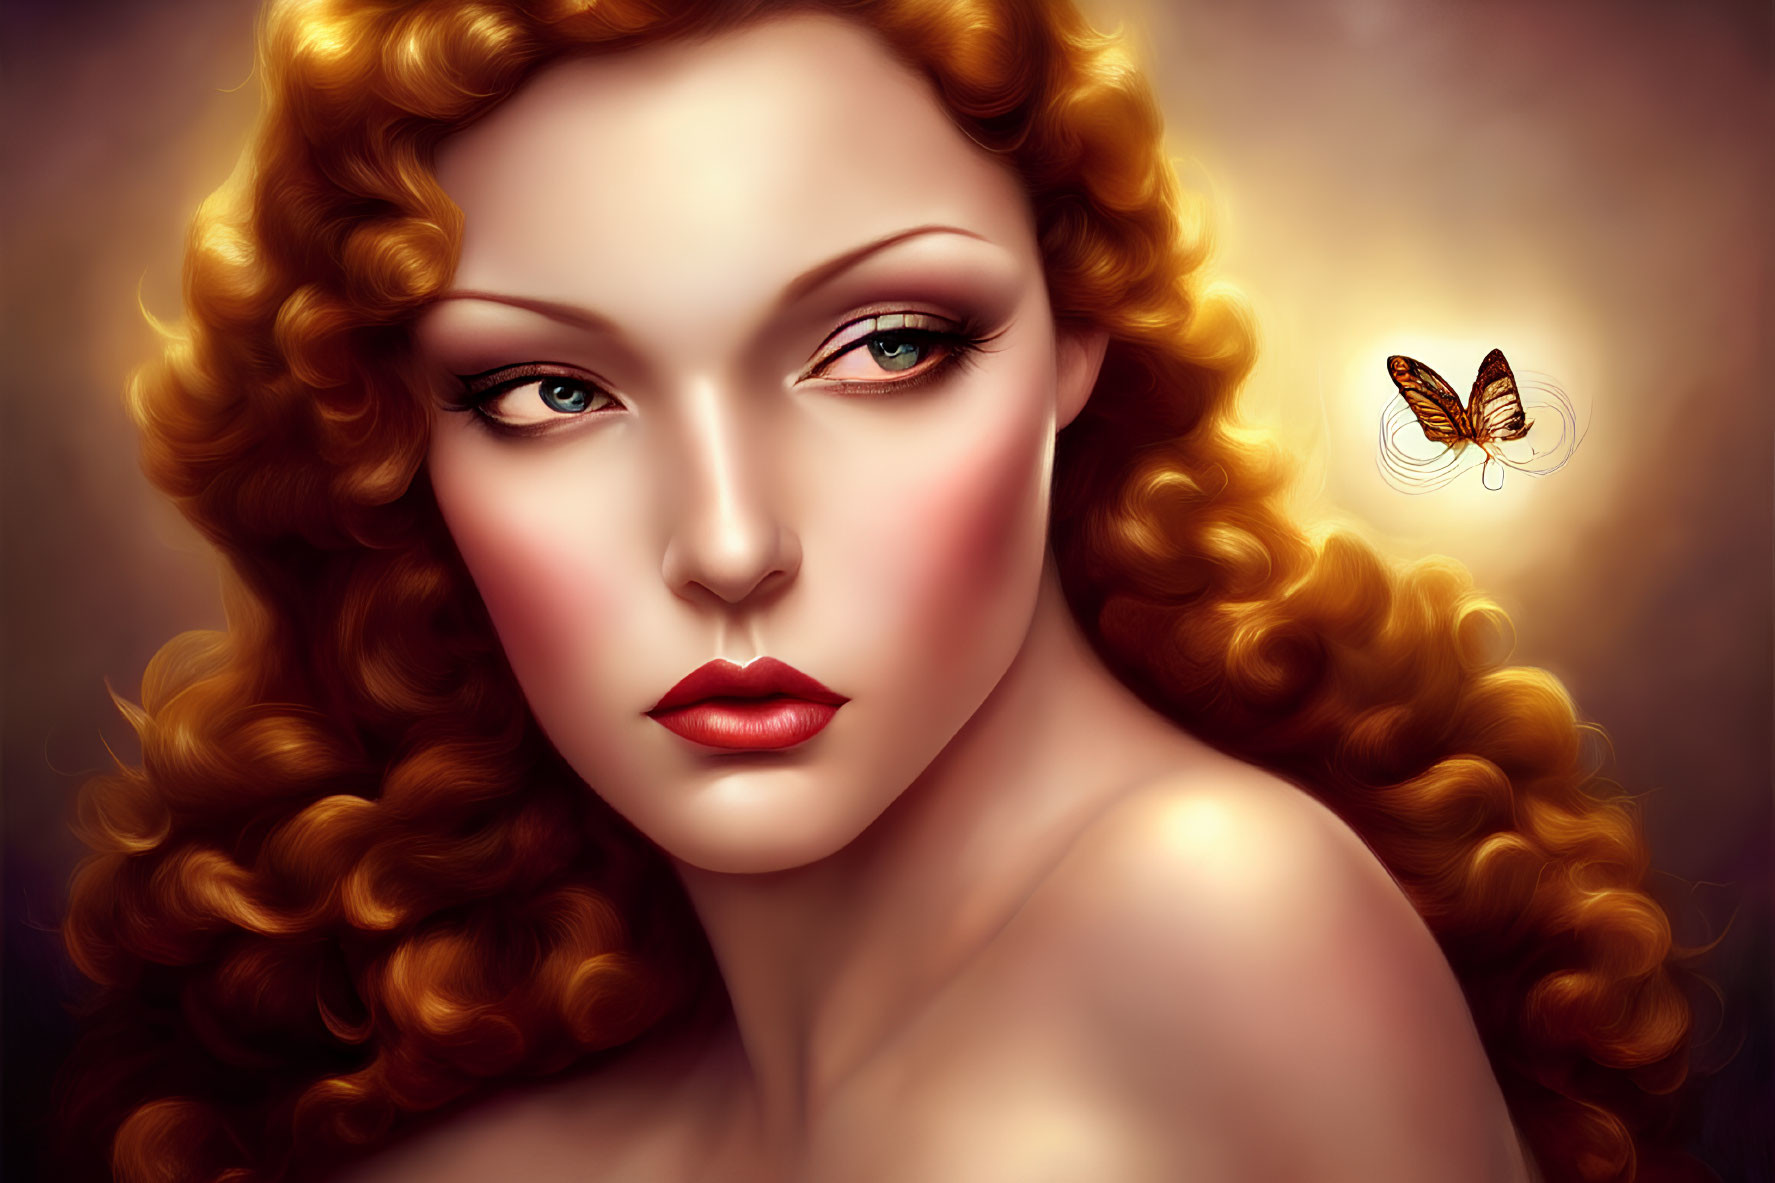 Digital portrait of woman with curly red hair, fair skin, green eyes, red lipstick, and butterfly